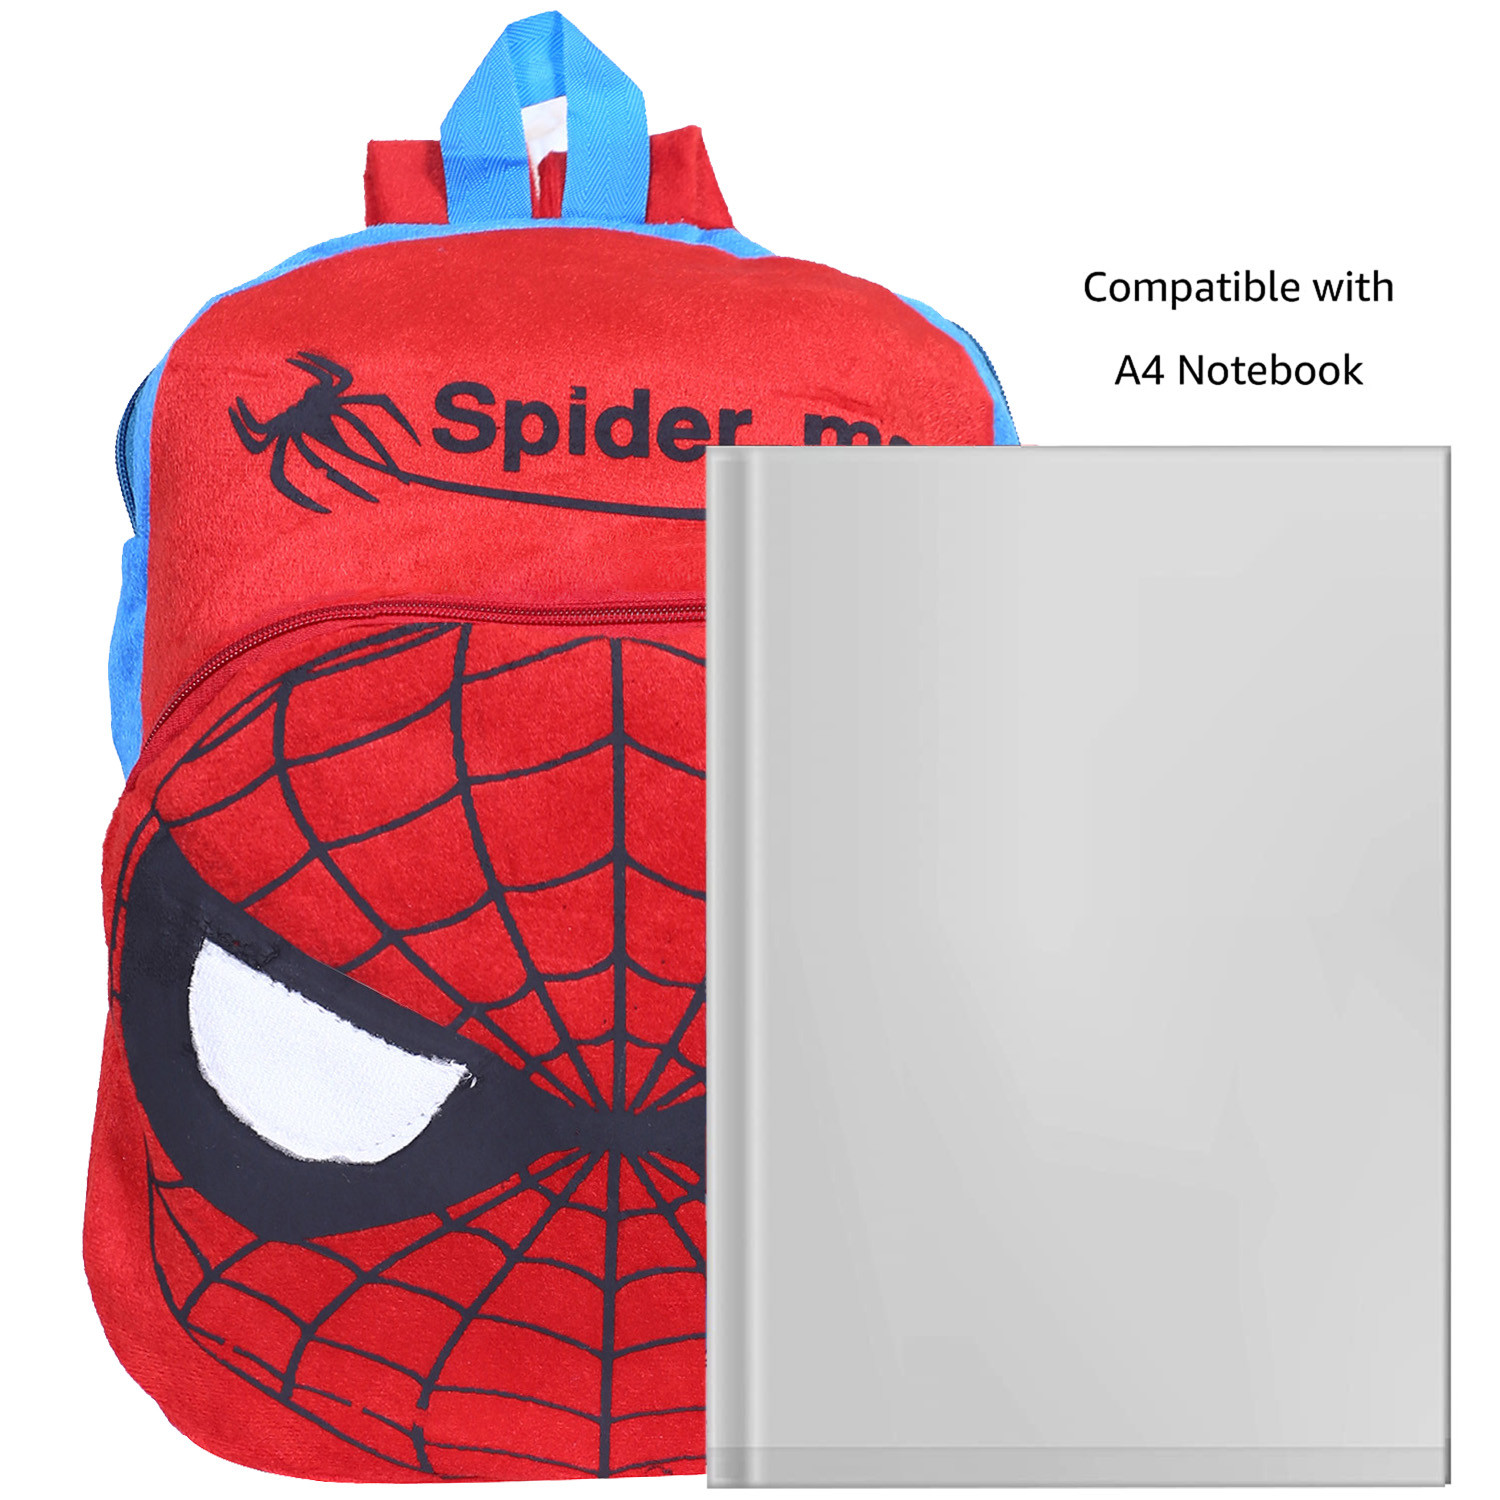 Kuber Industries Marvel Spiderman Plush Backpack|2 Compartment Stitched Velvet School Bag|Durable Toddler Haversack For Travel,School with Zipper Closure (Blue)